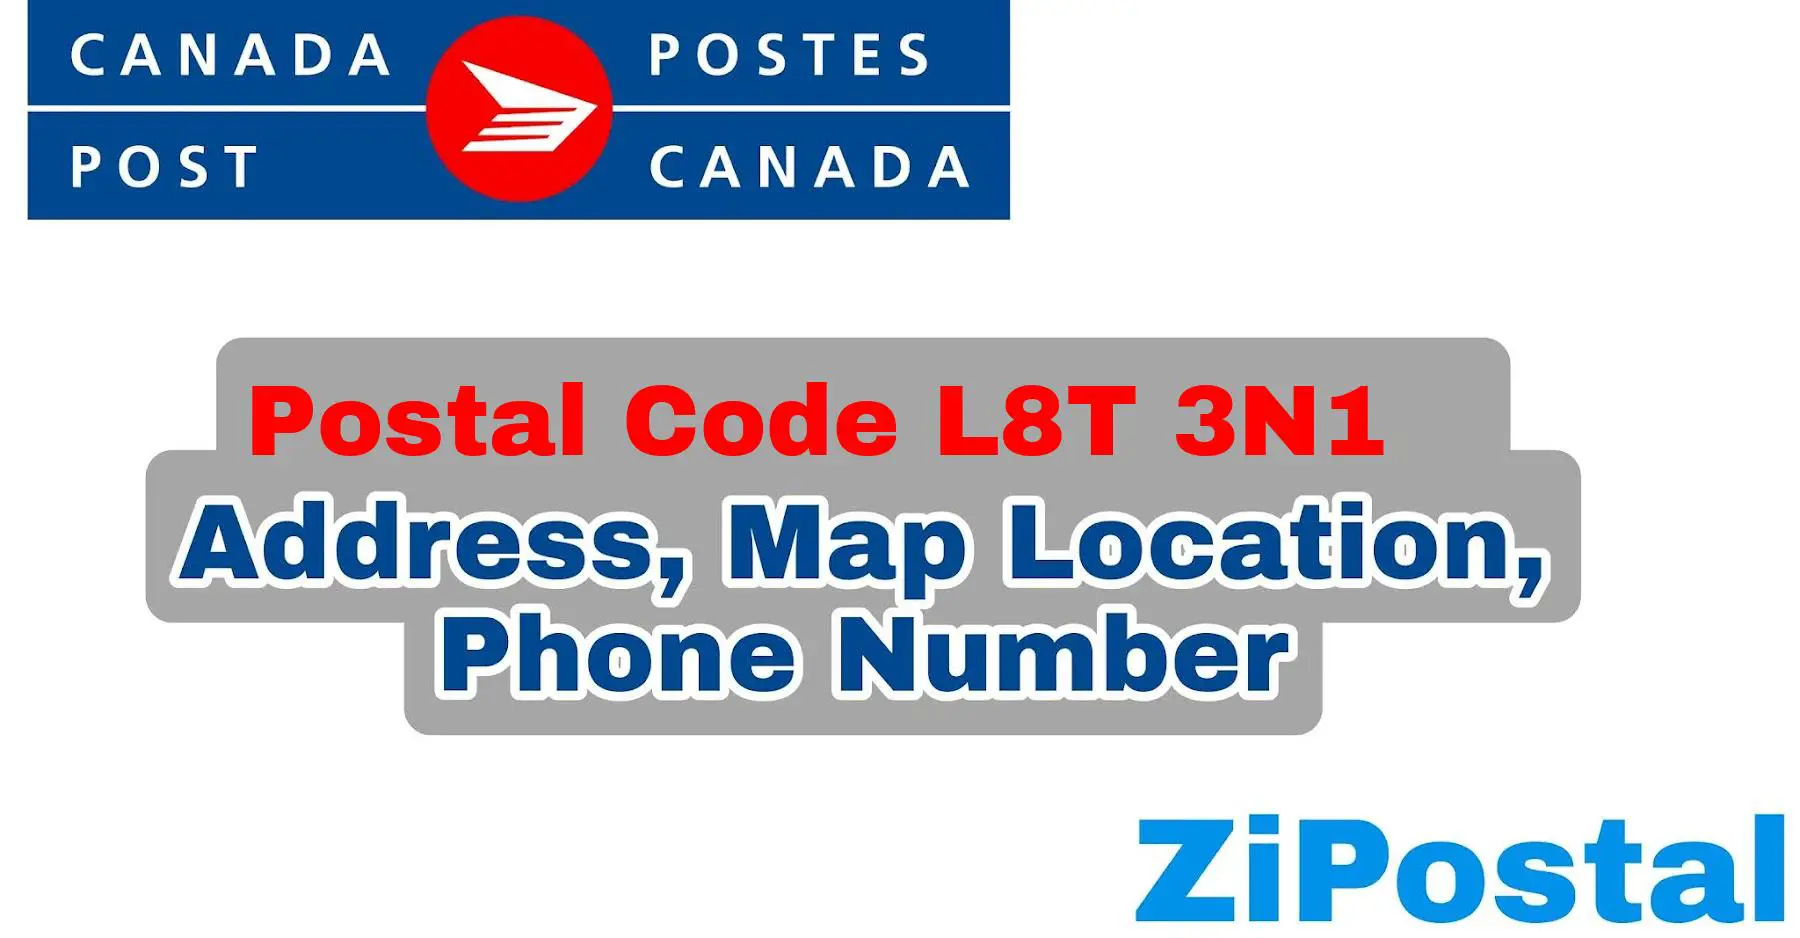 Postal Code L8T 3N1 Address Map Location and Phone Number